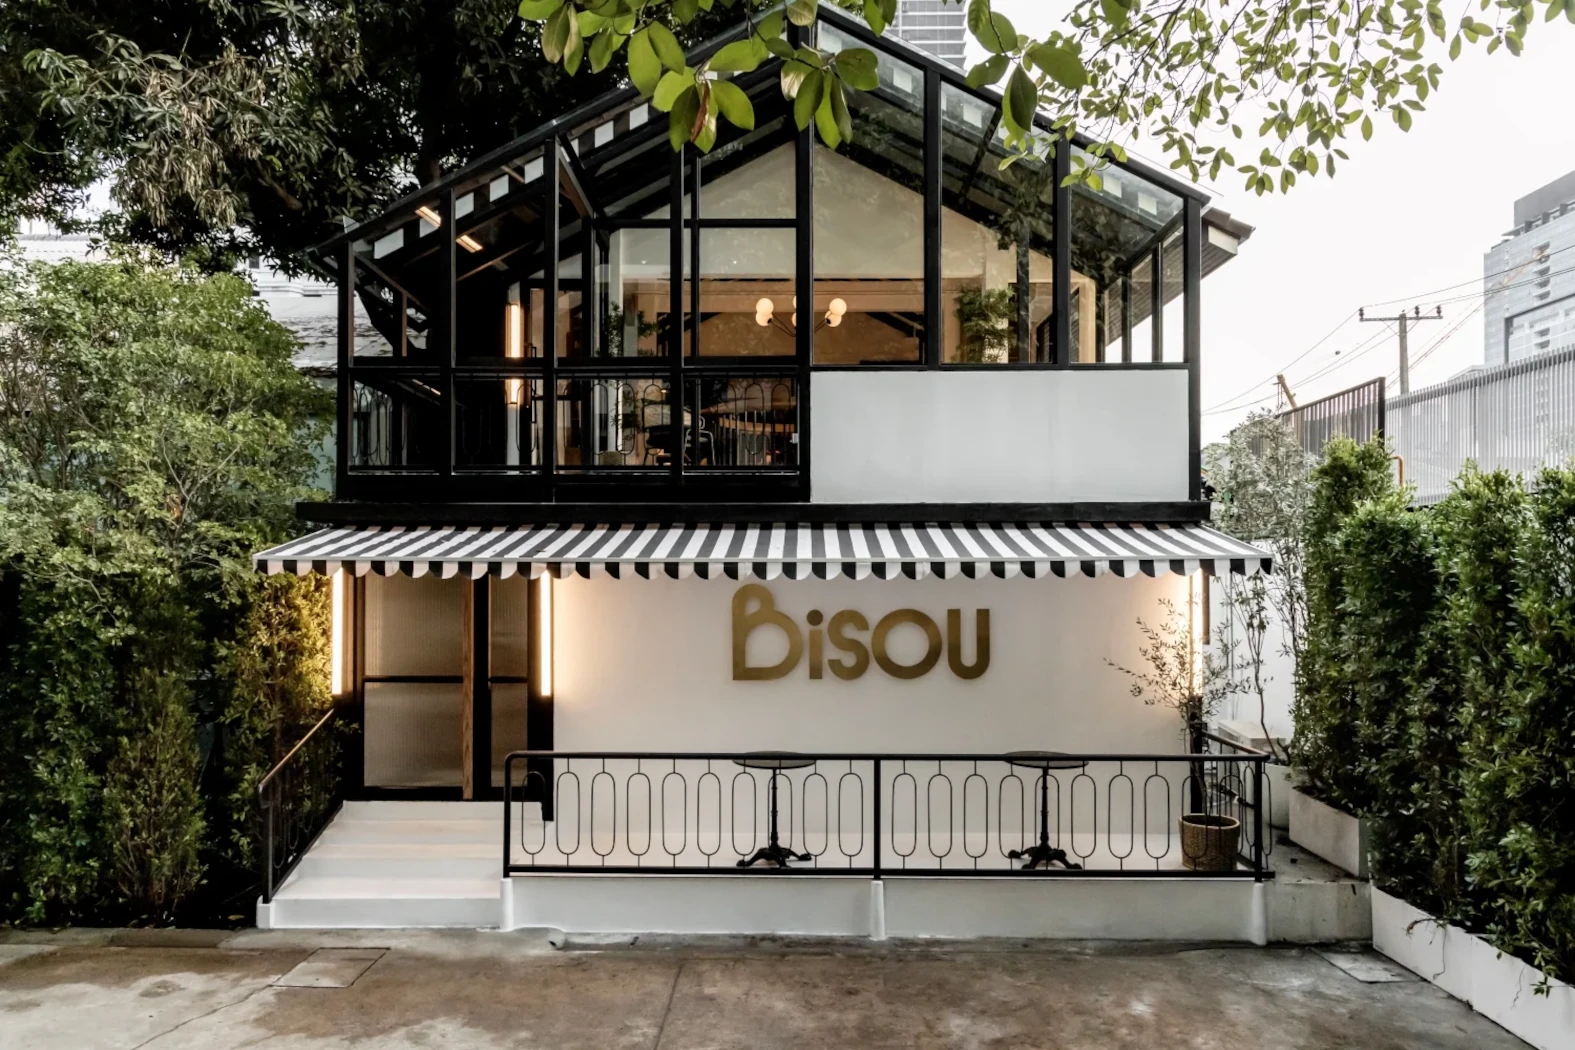 photo of the exterior of the Bisou restaurant in Bangkok